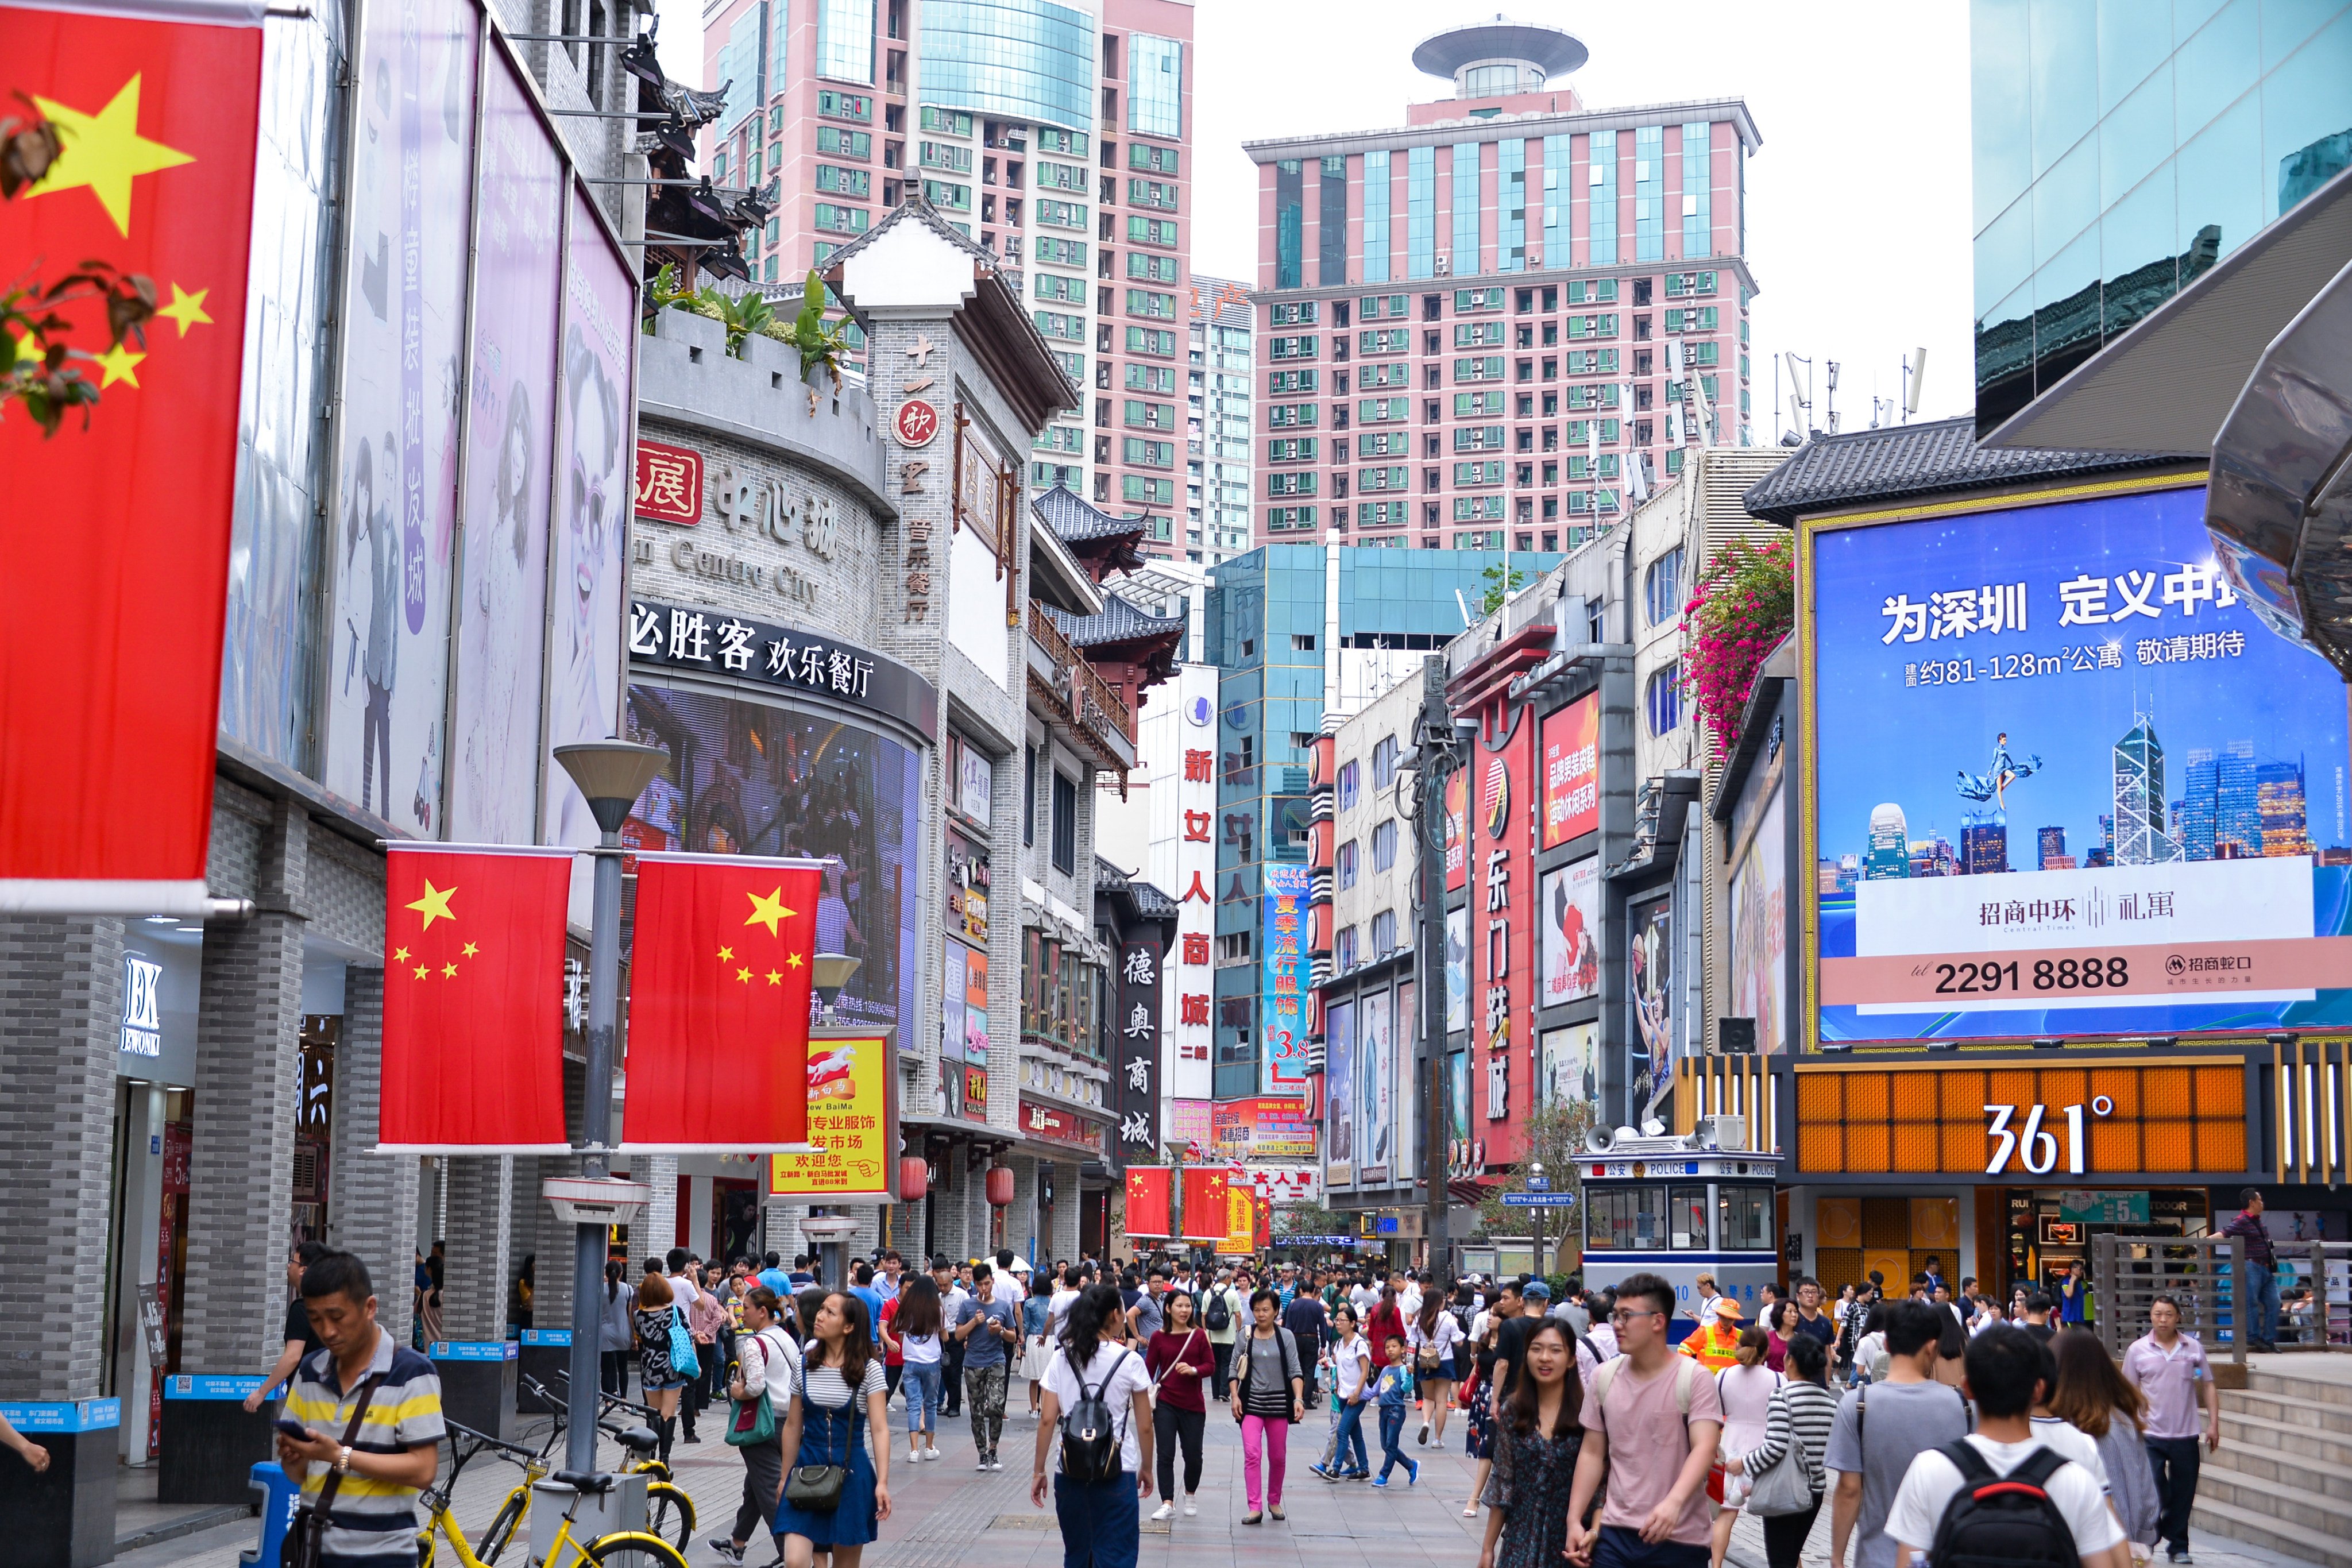 To get to places in Shenzhen like Dongmen Pedestrian Street (above), Hong Kong residents without the right visa can apply for one on arrival. That’s not all you need to know - we break down the essentials for your trip from Hong Kong. Photo: Shutterstock